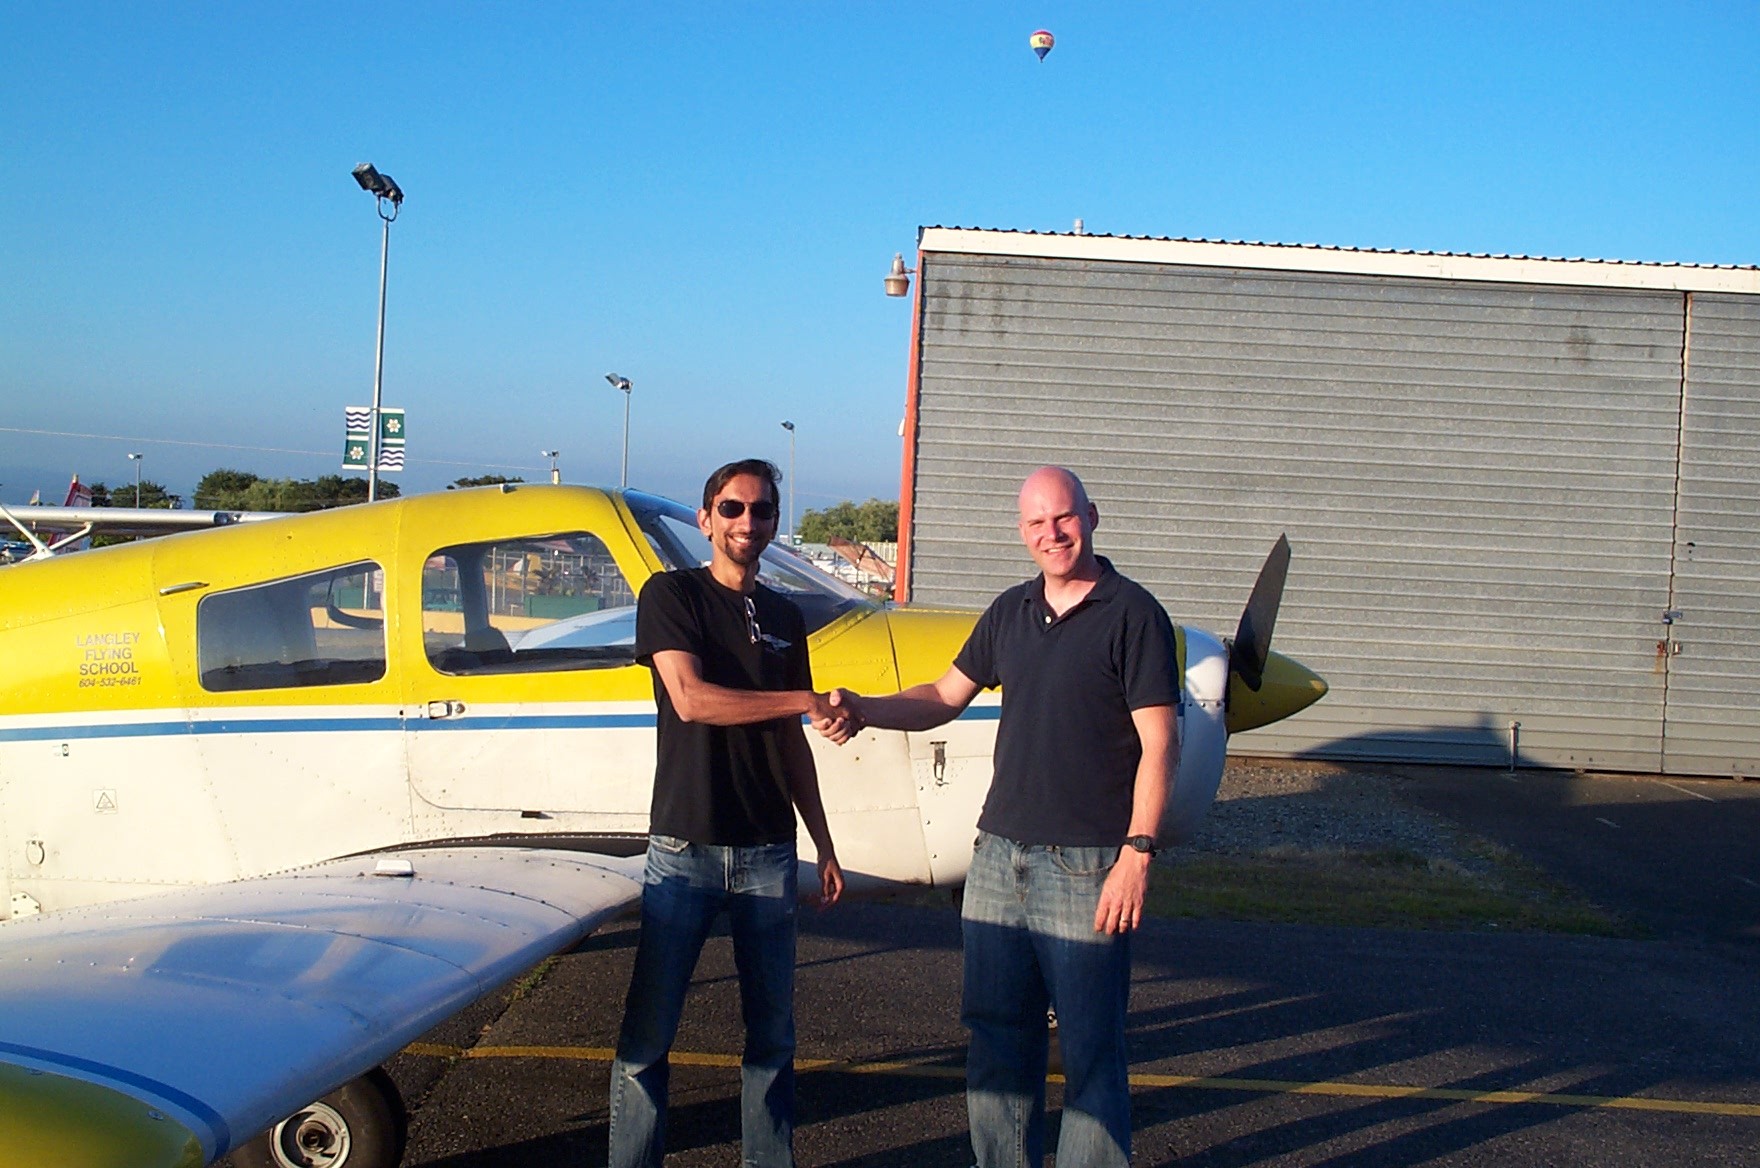 Carl Tingstad receives contrats from his Flight Instructor, Mayank Mittal.  Langley Flying School.